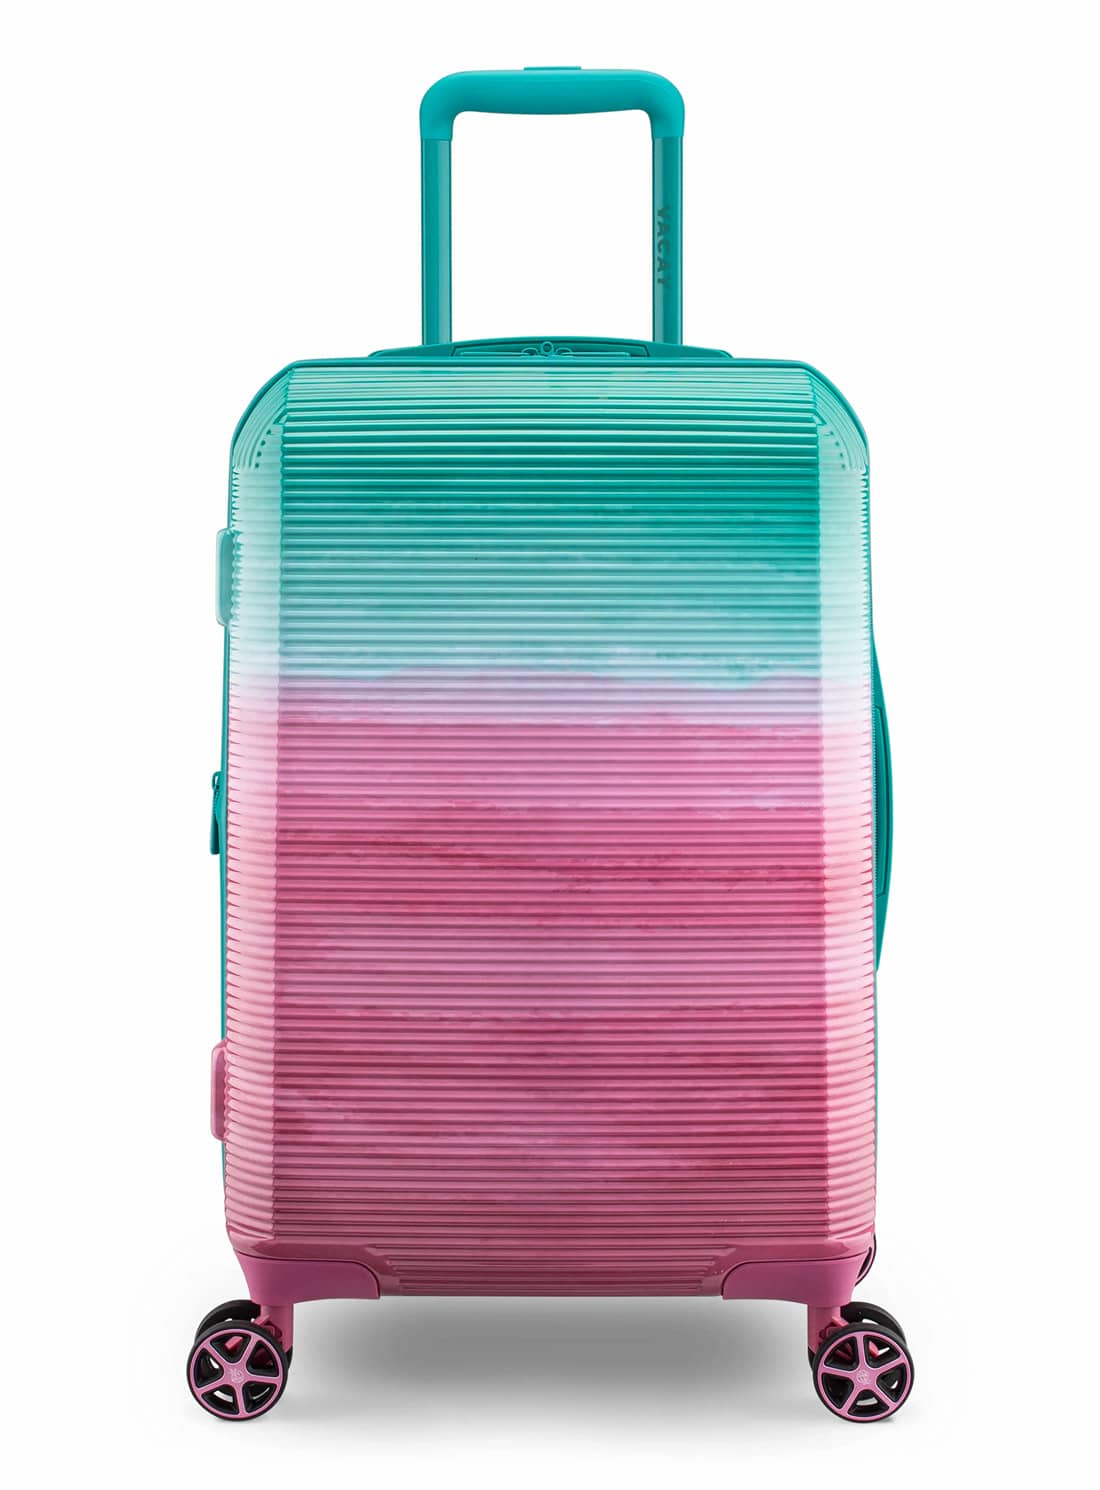 Vacay Carry On Luggage